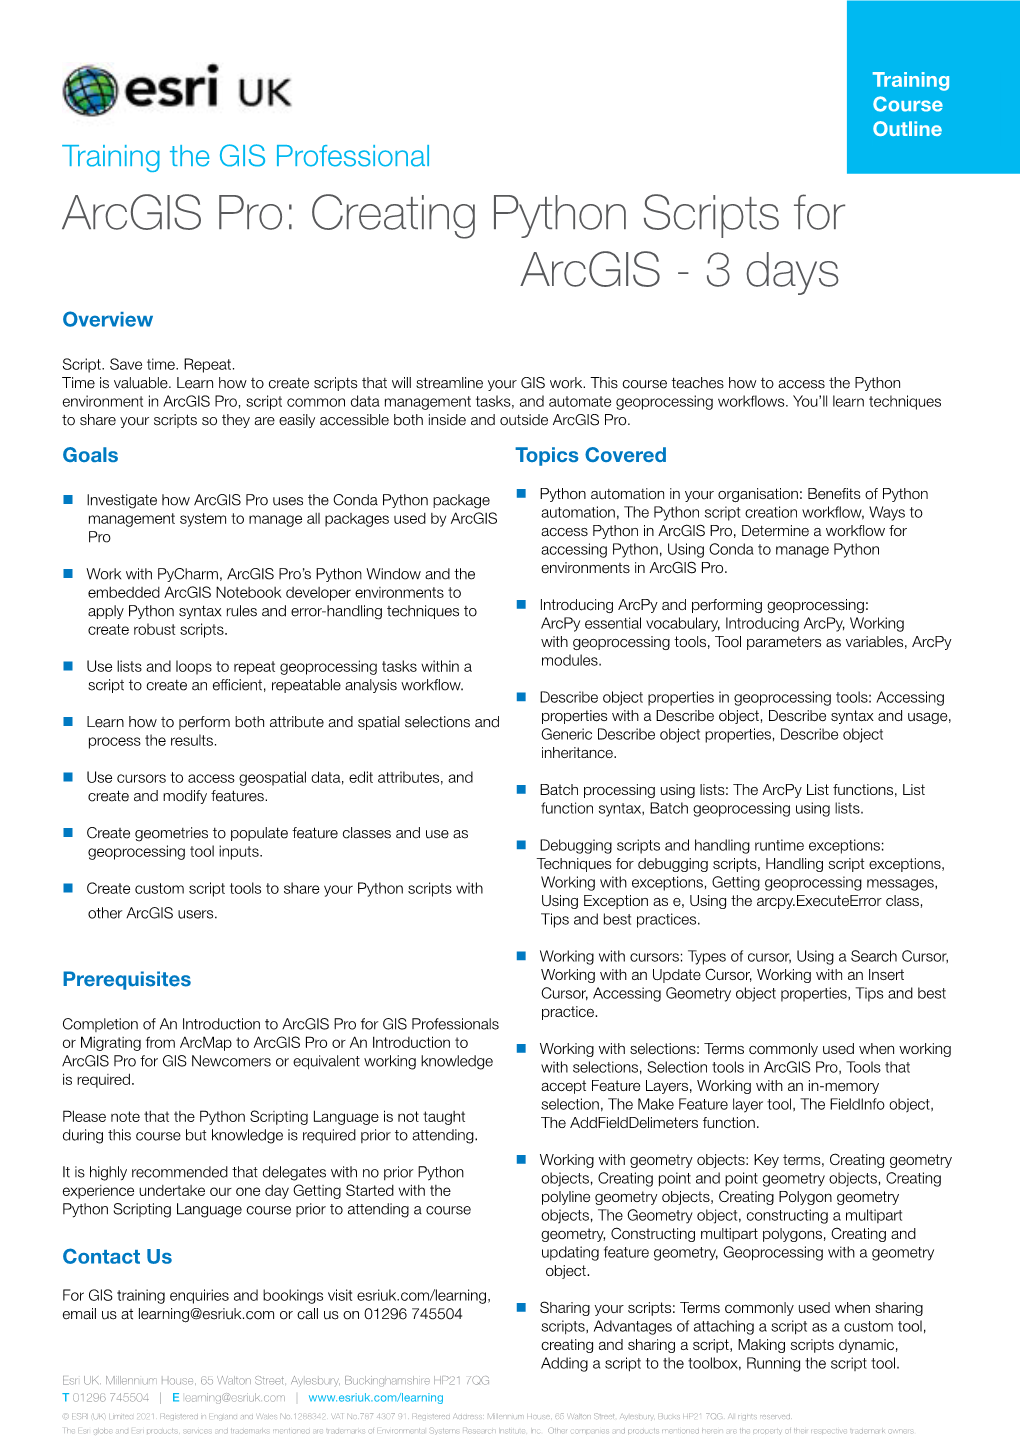 Arcgis Pro: Creating Python Scripts for Arcgis - 3 Days Overview